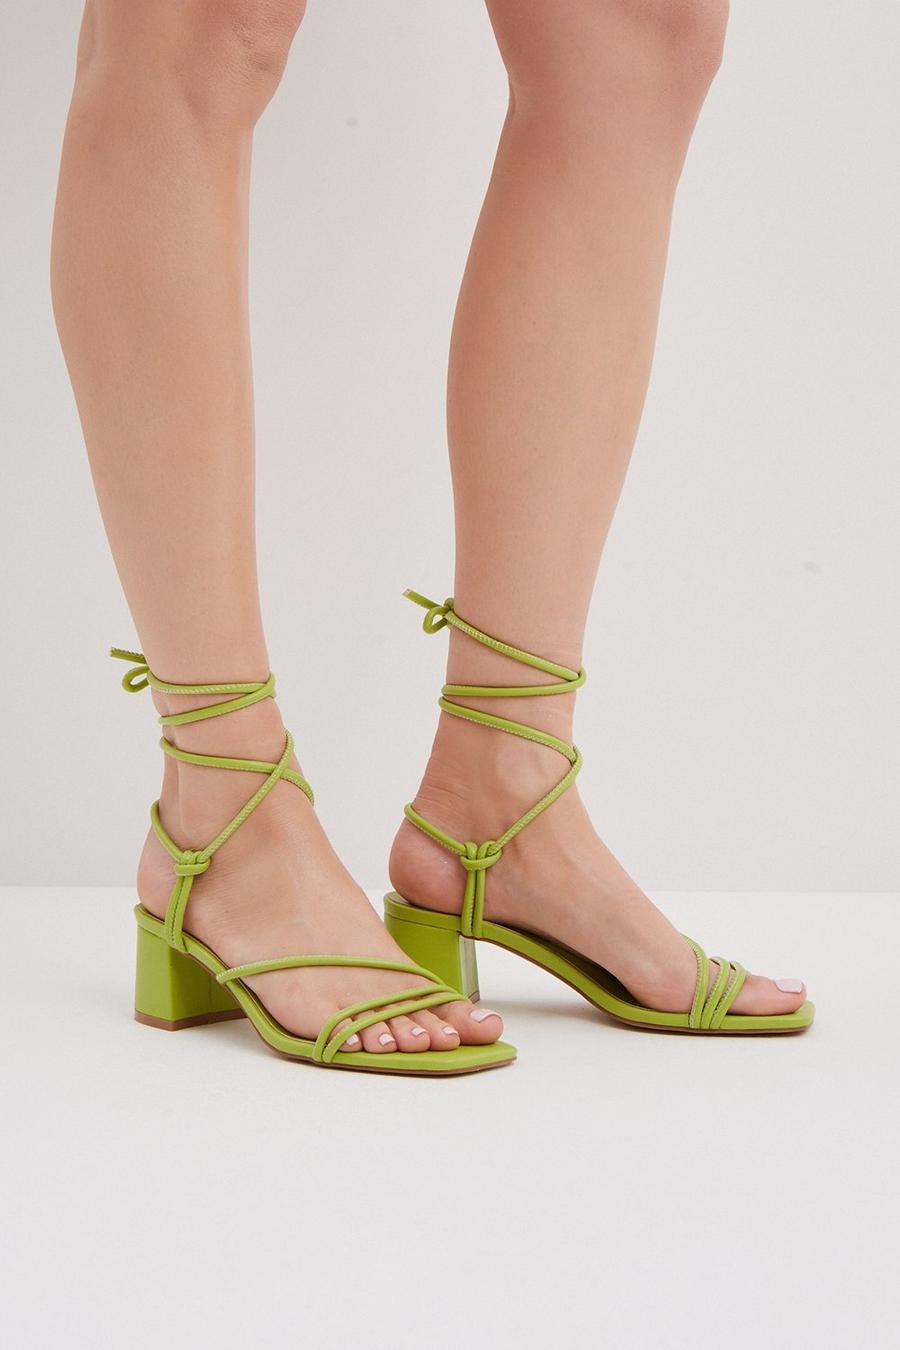 Swerve Knotted Lace Up Heeled Sandal